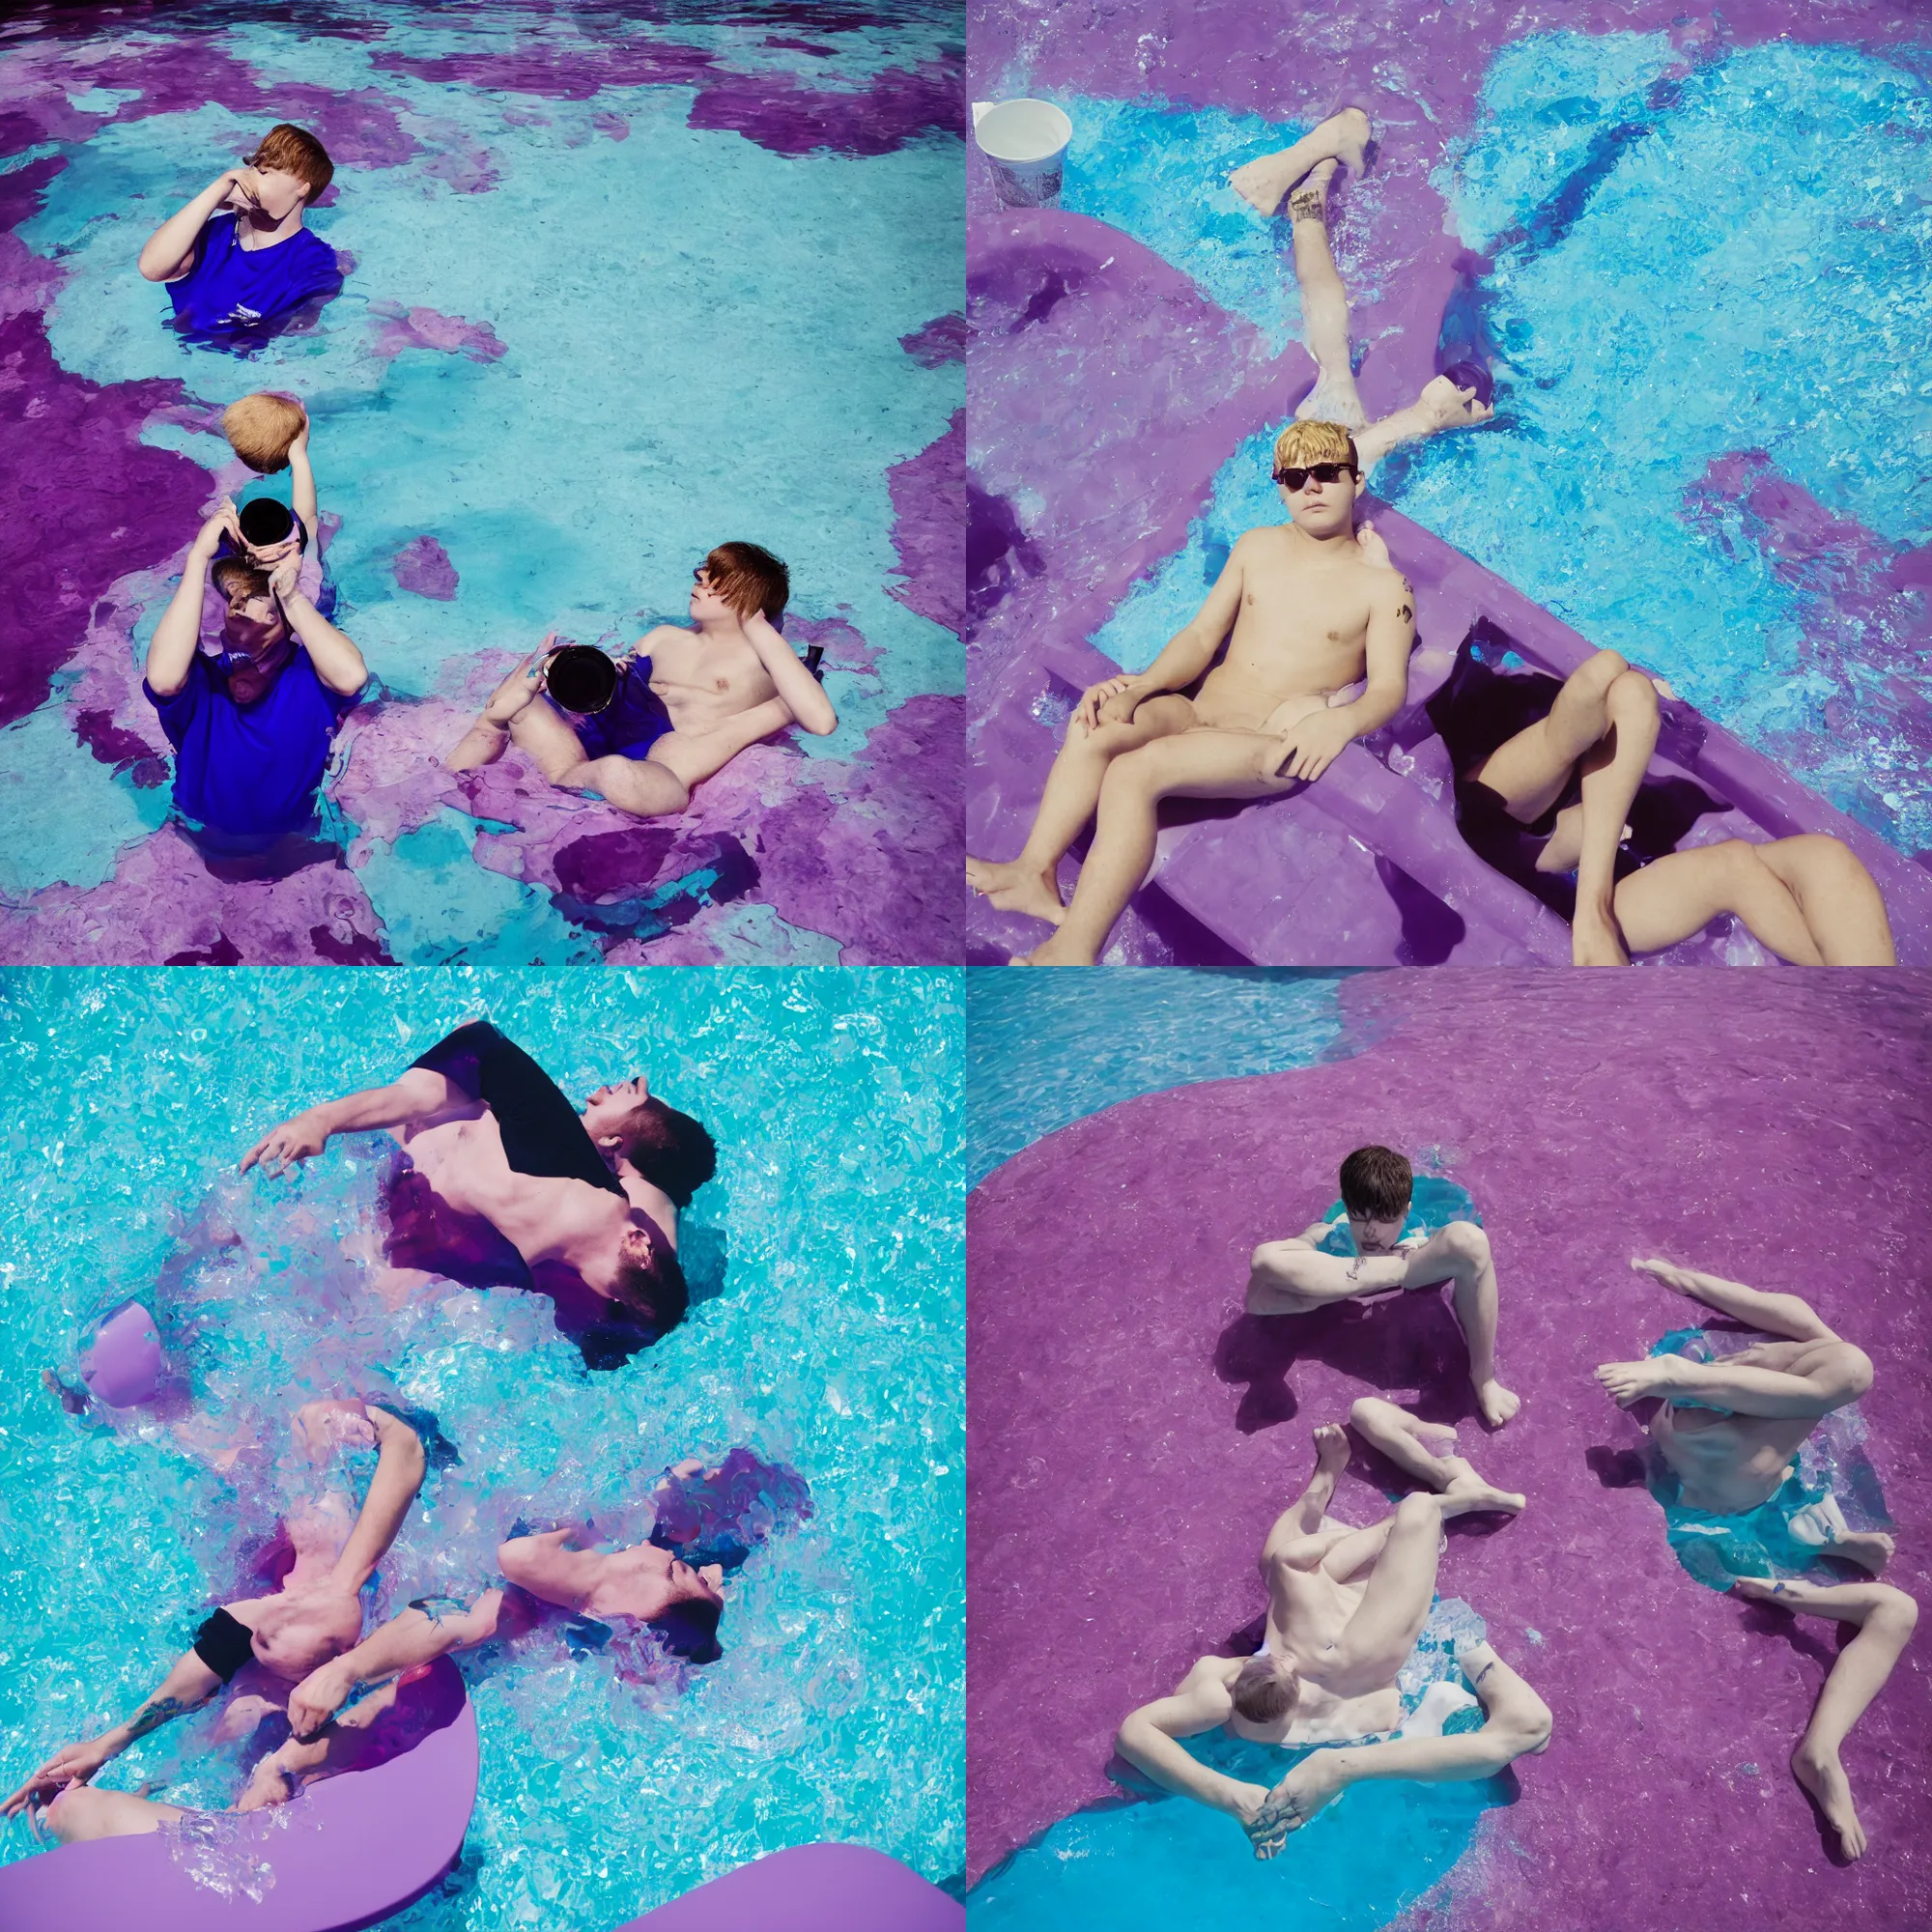 Prompt: Yung Lean relaxing in the middle of a purple pool drinking out of a plastic cup, fujifilm, 16mm, broad lighting